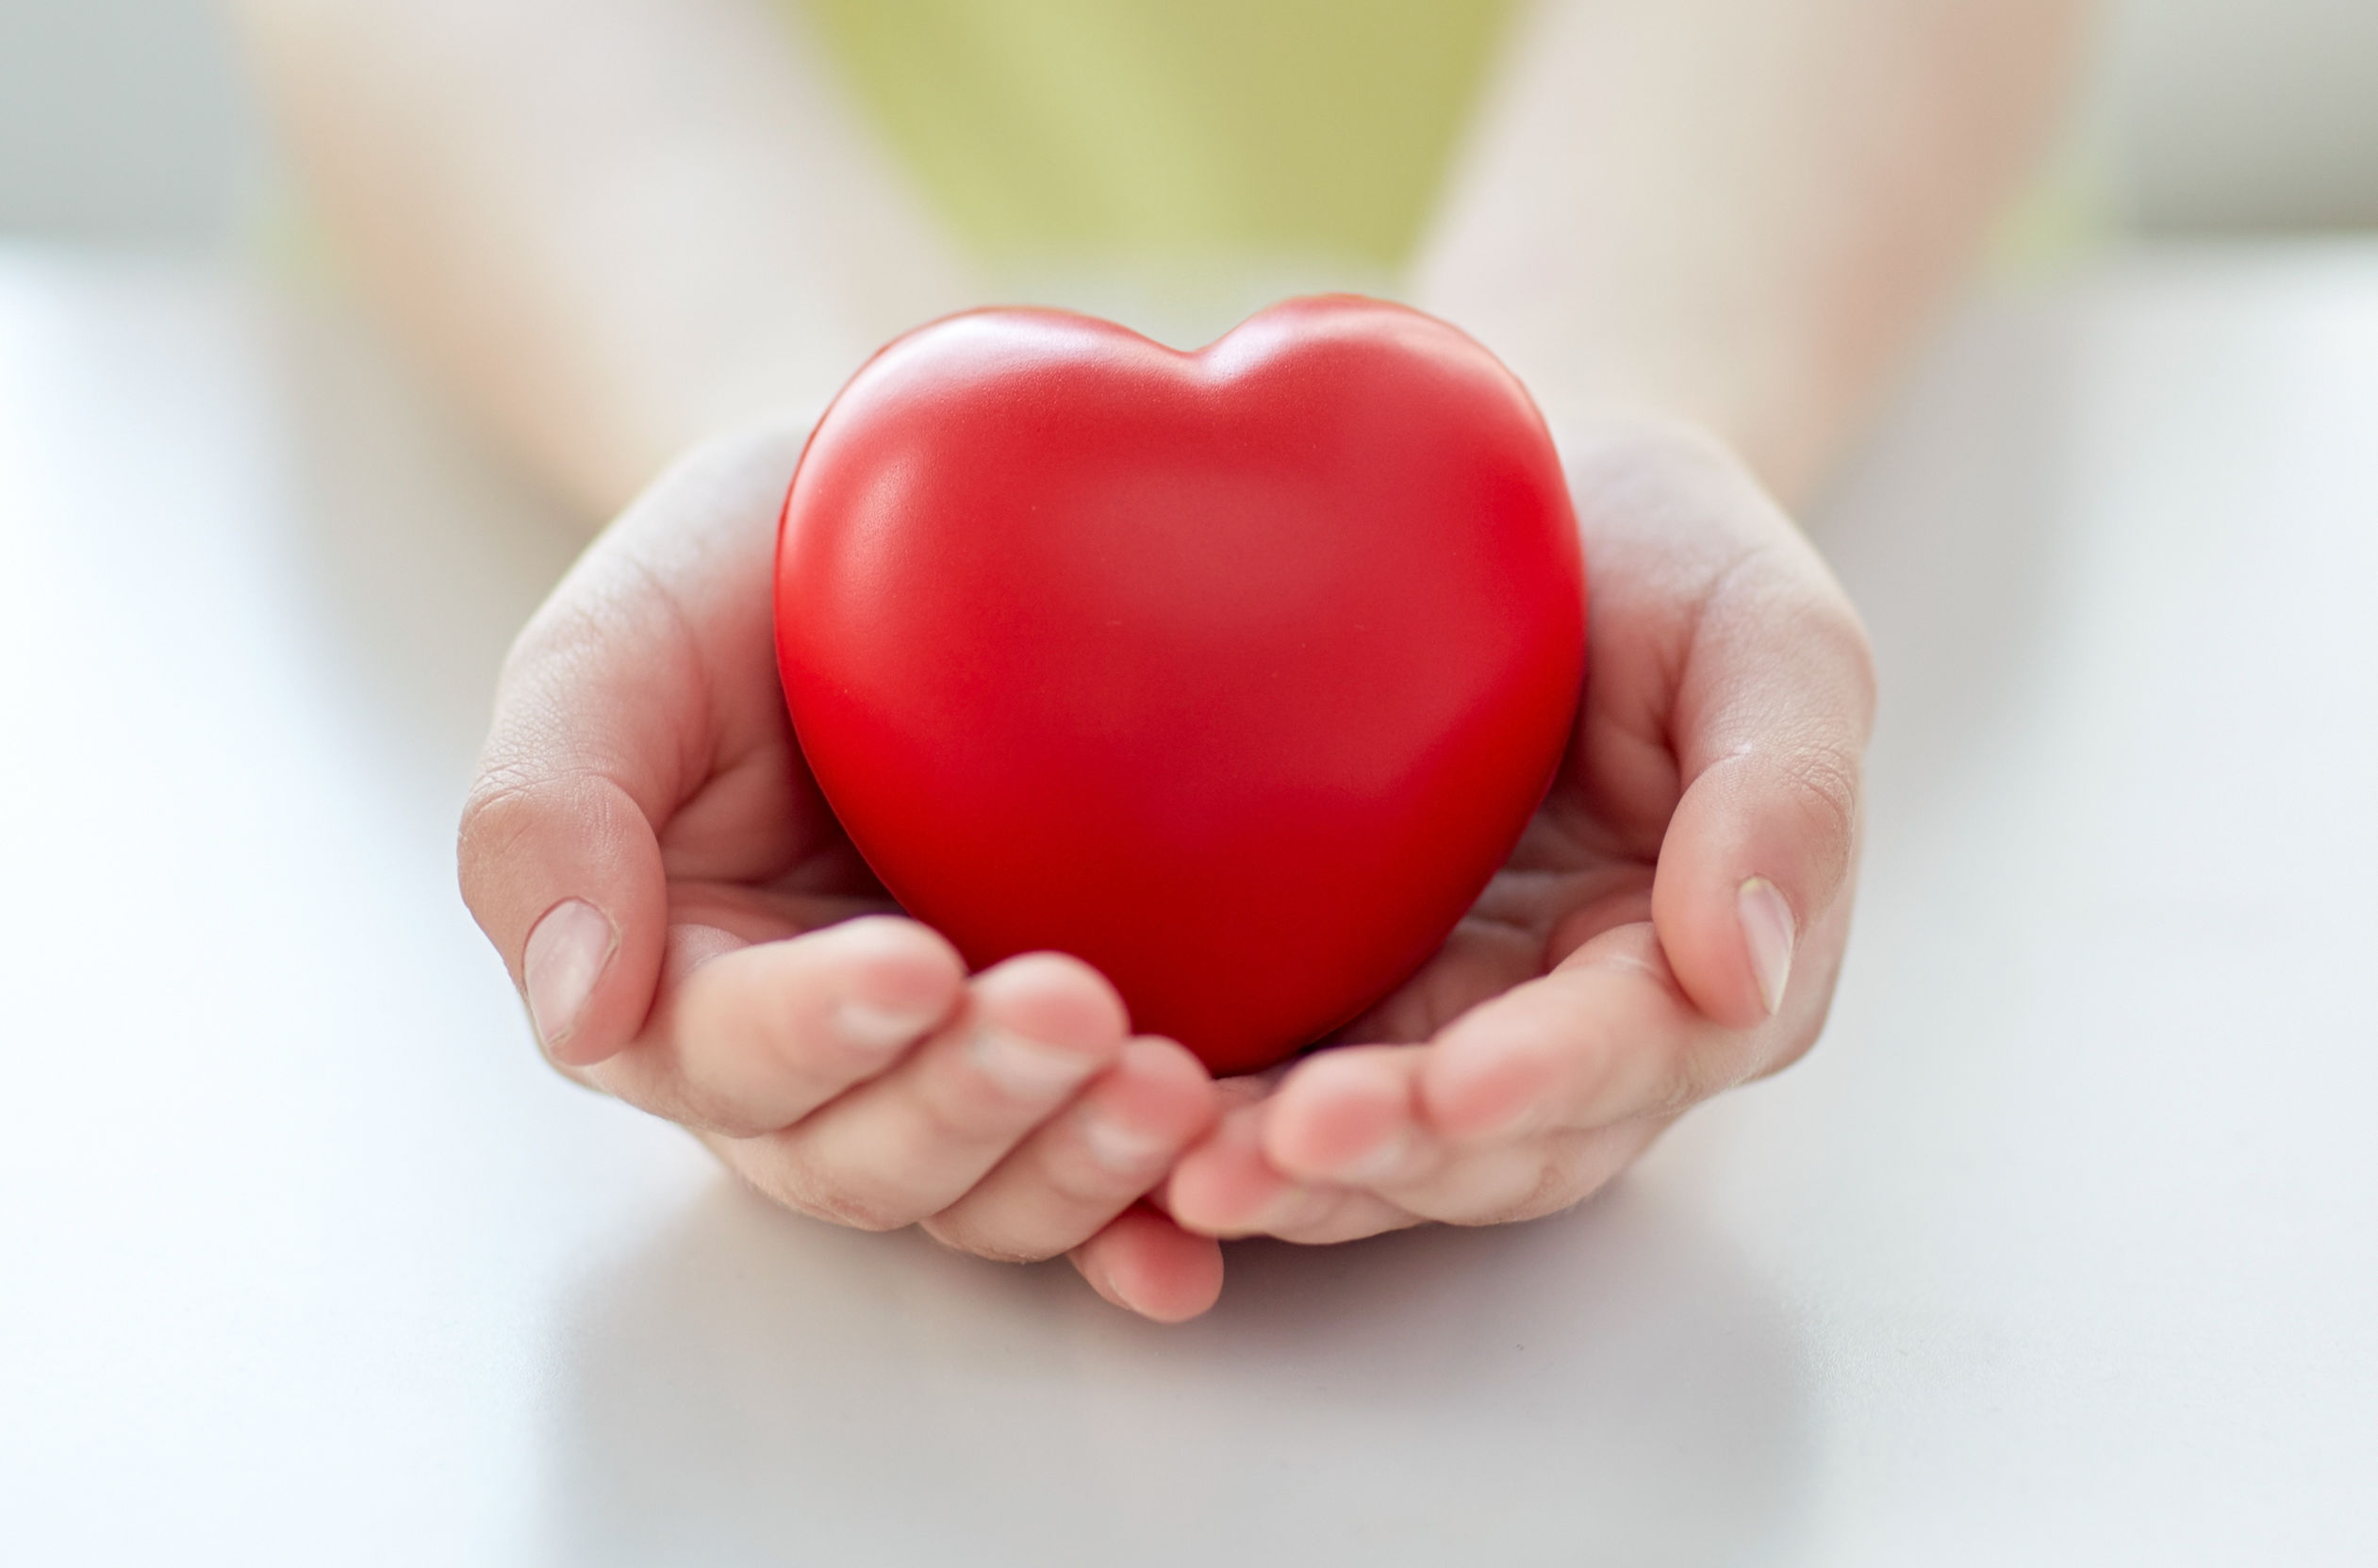 Close-up of a pair of hands holding a red heart shape